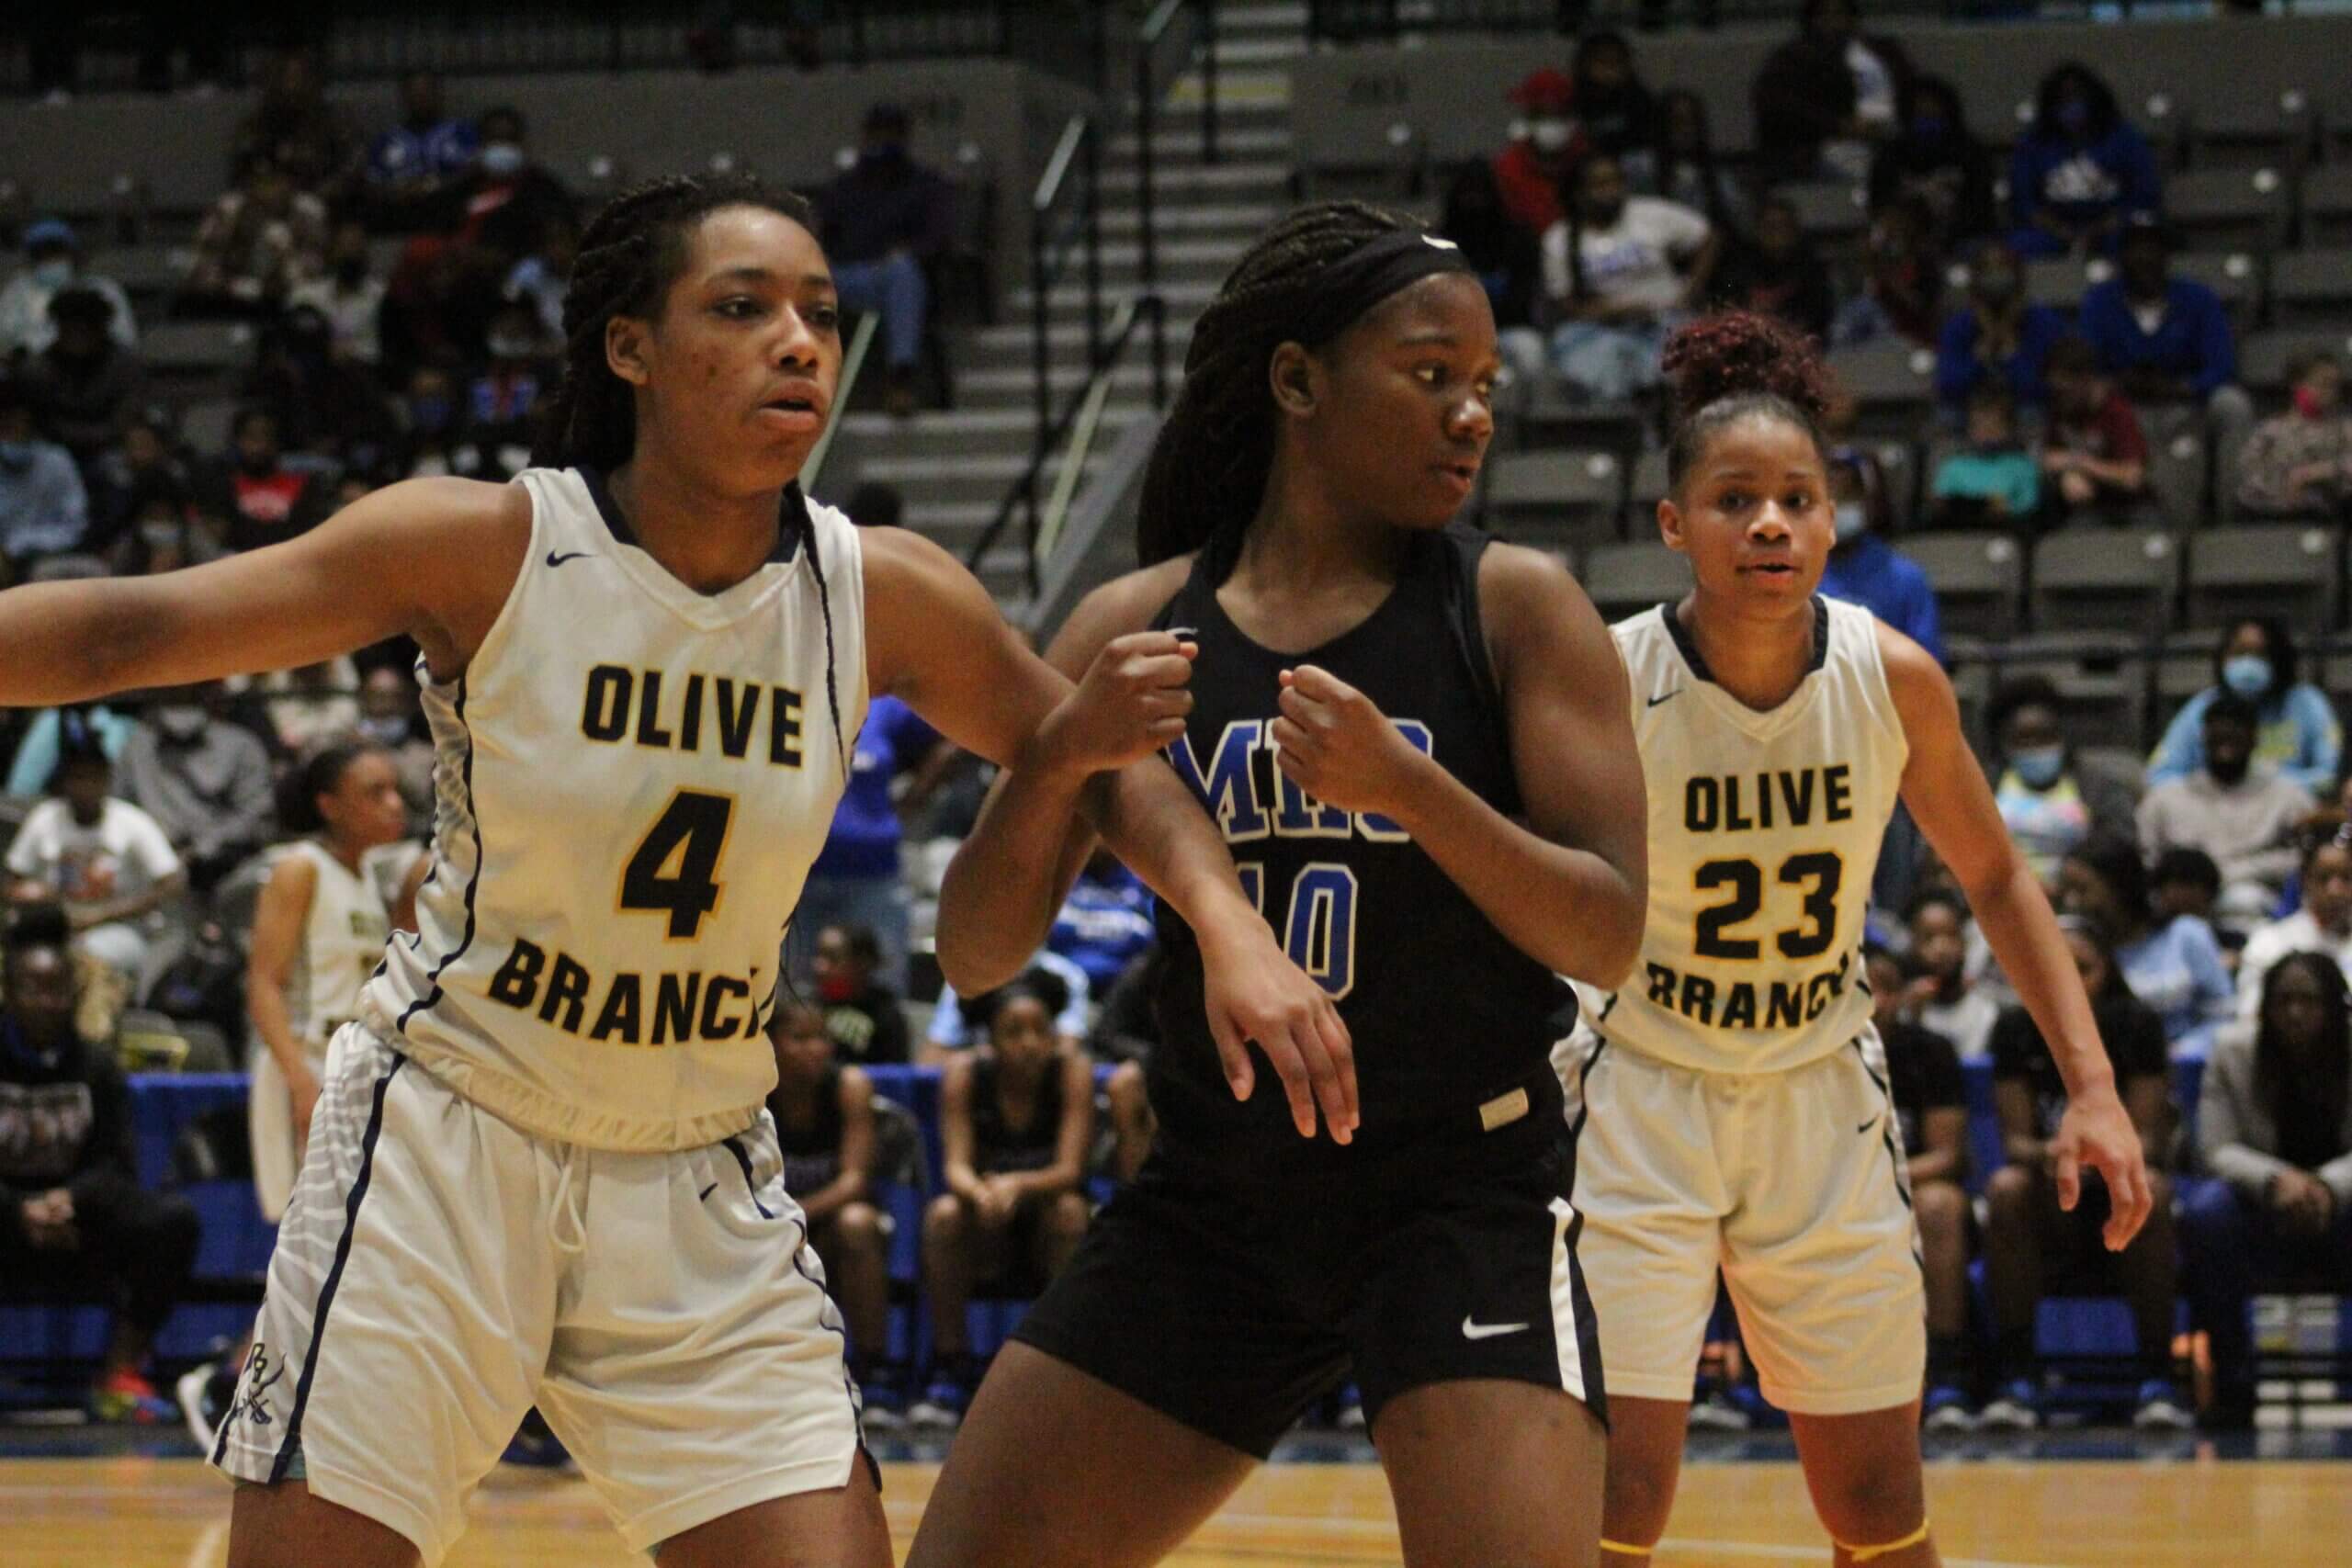 Olive Branch girls advance to another state final